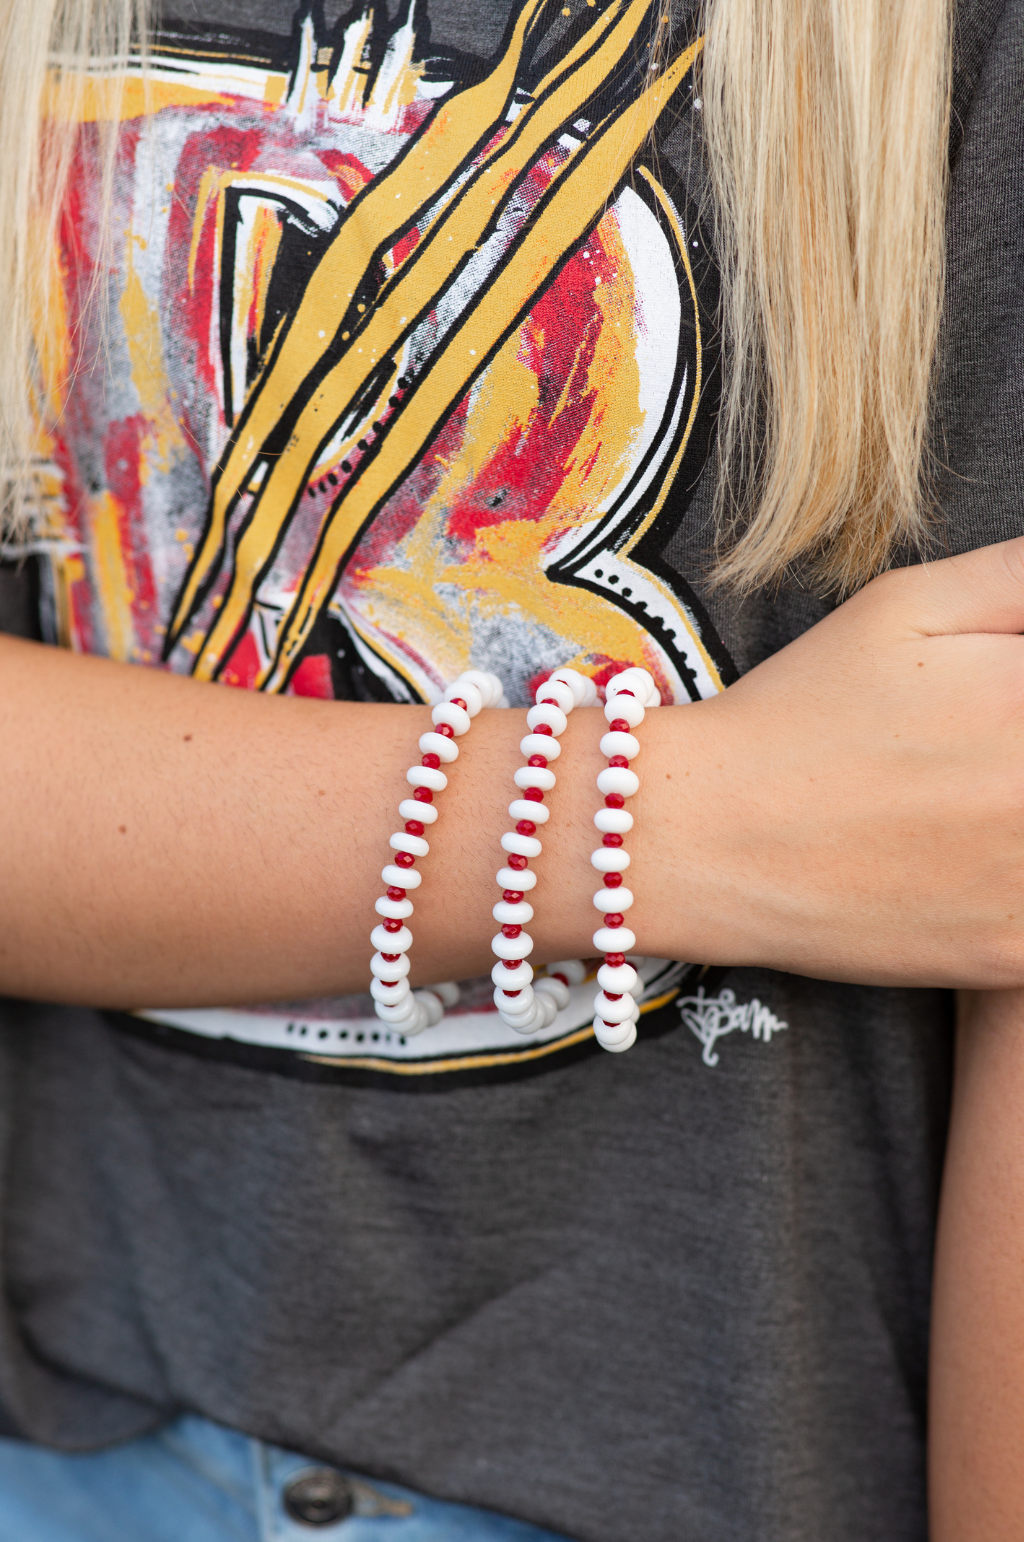 The Kennedy Local Love Bracelet Stack by Annie Claire Designs - SoSis